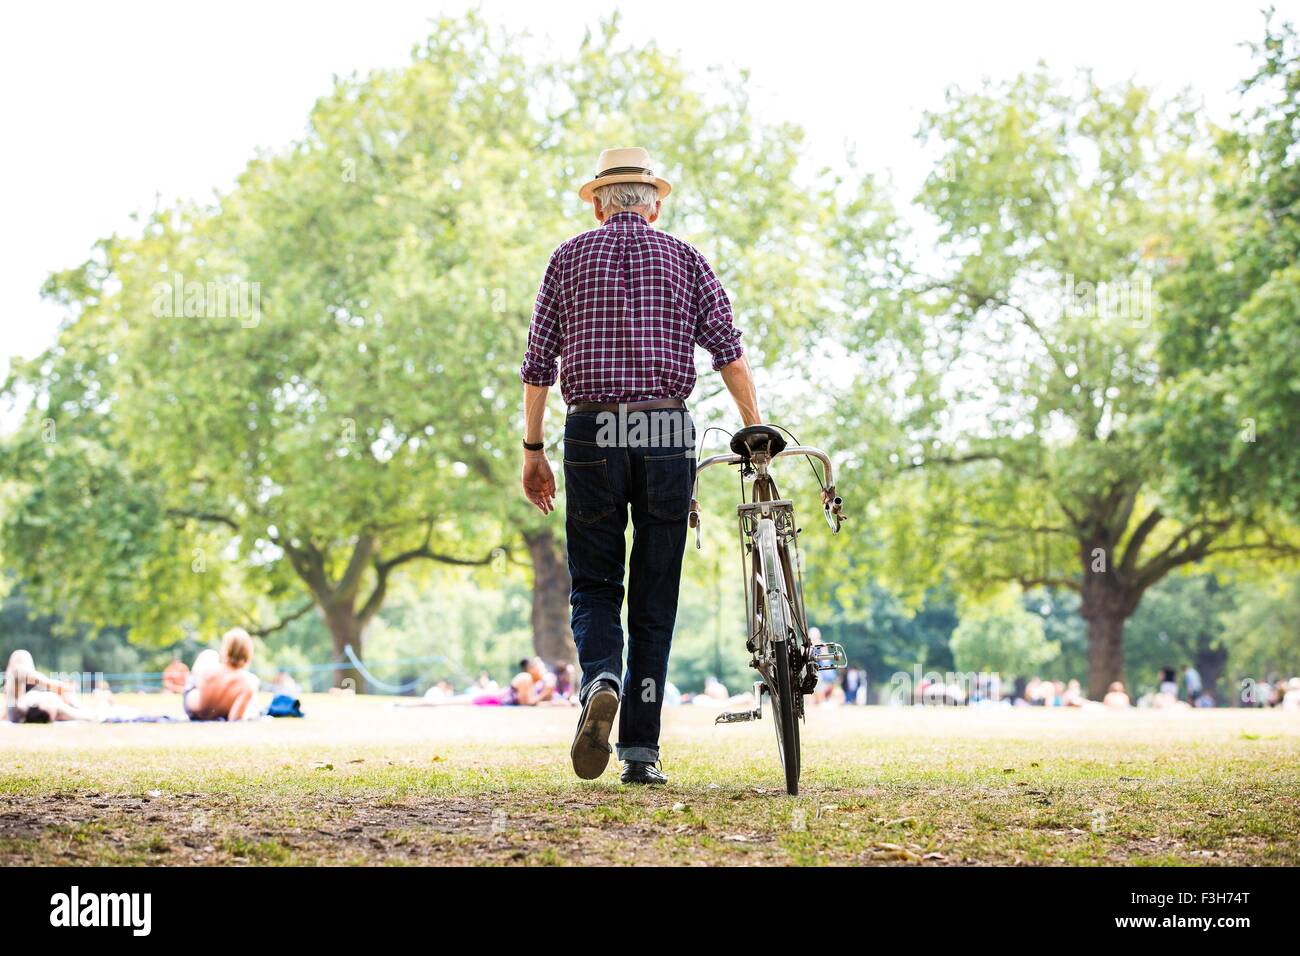 Senior man with bicycle in park, Hackney, London Stock Photo